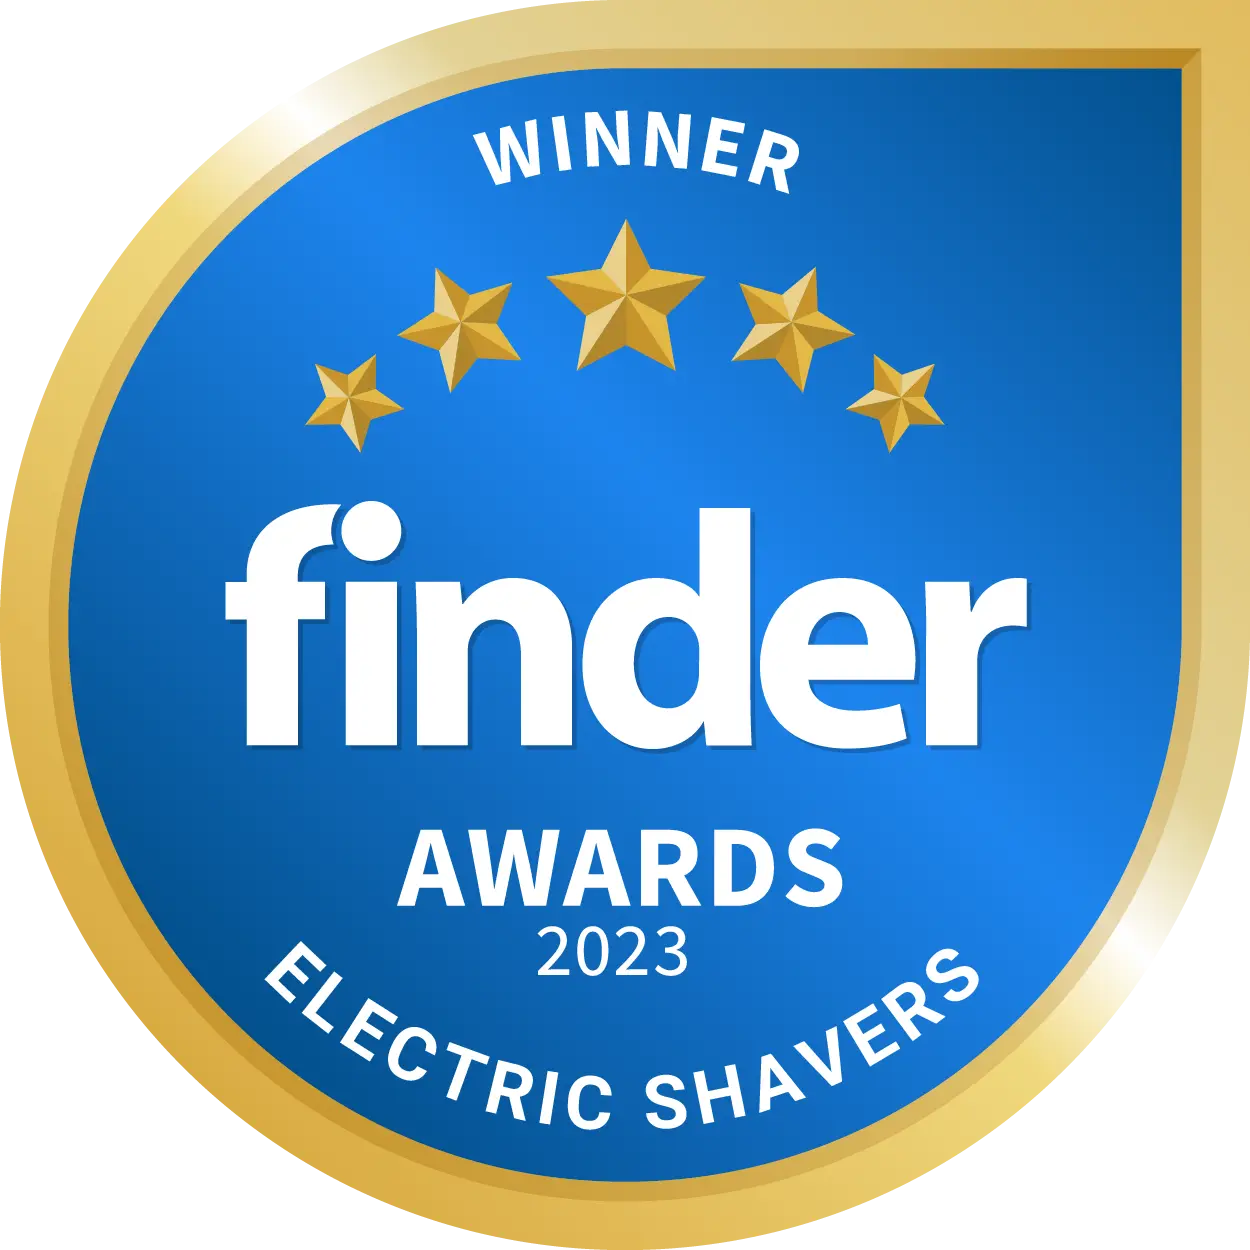 Best electric shaver brand